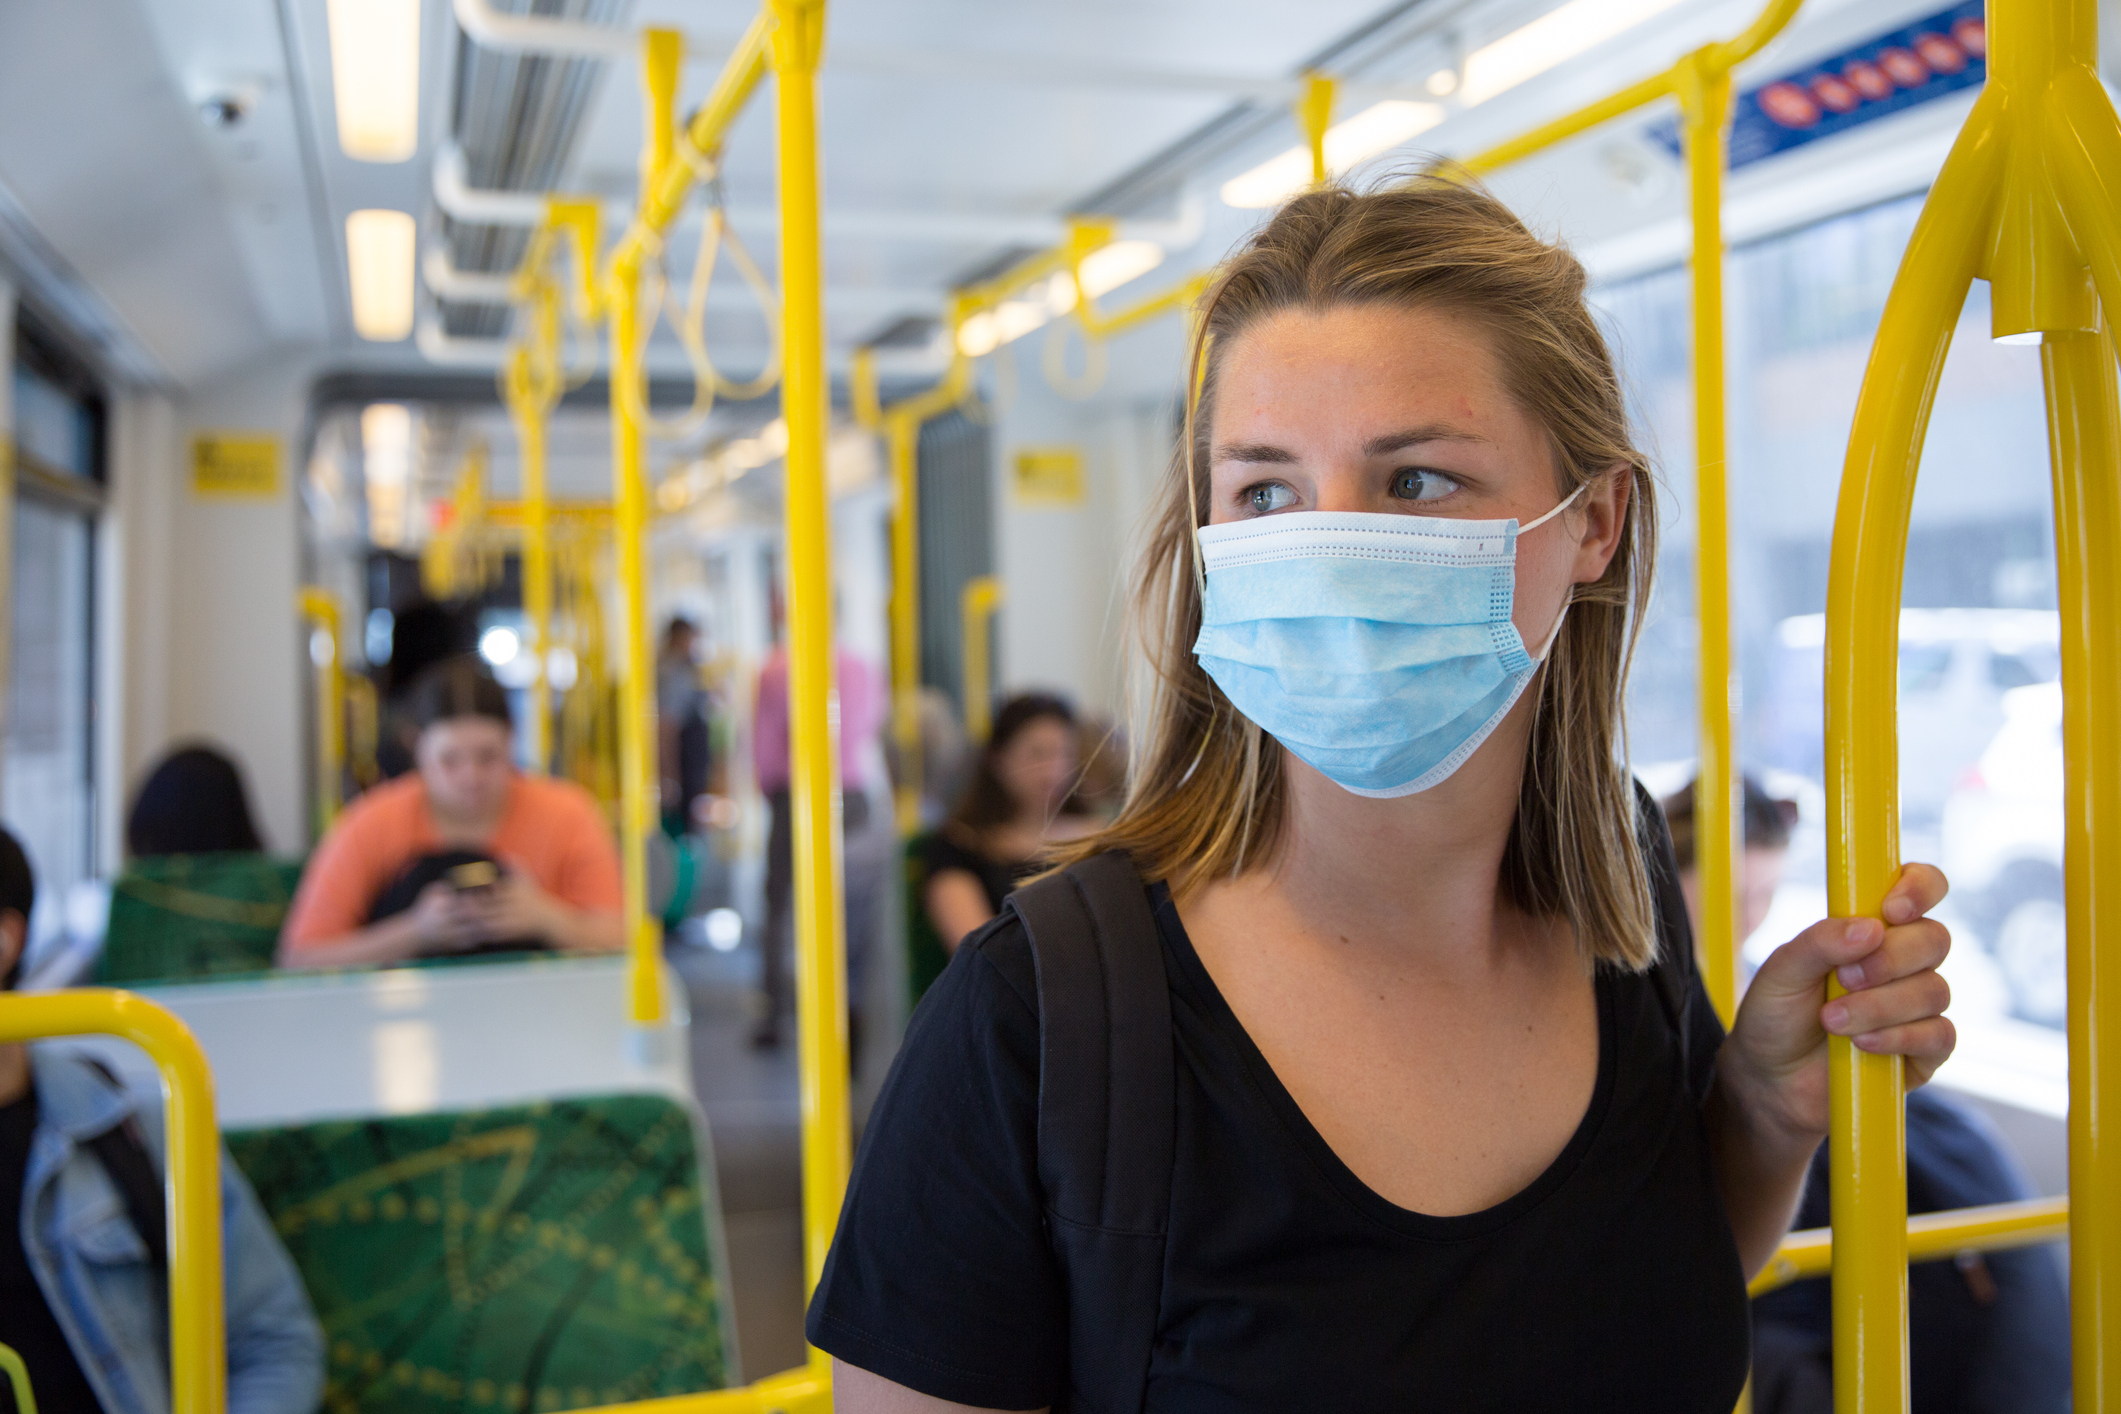 Woman in COVID-19 face mask on public transport